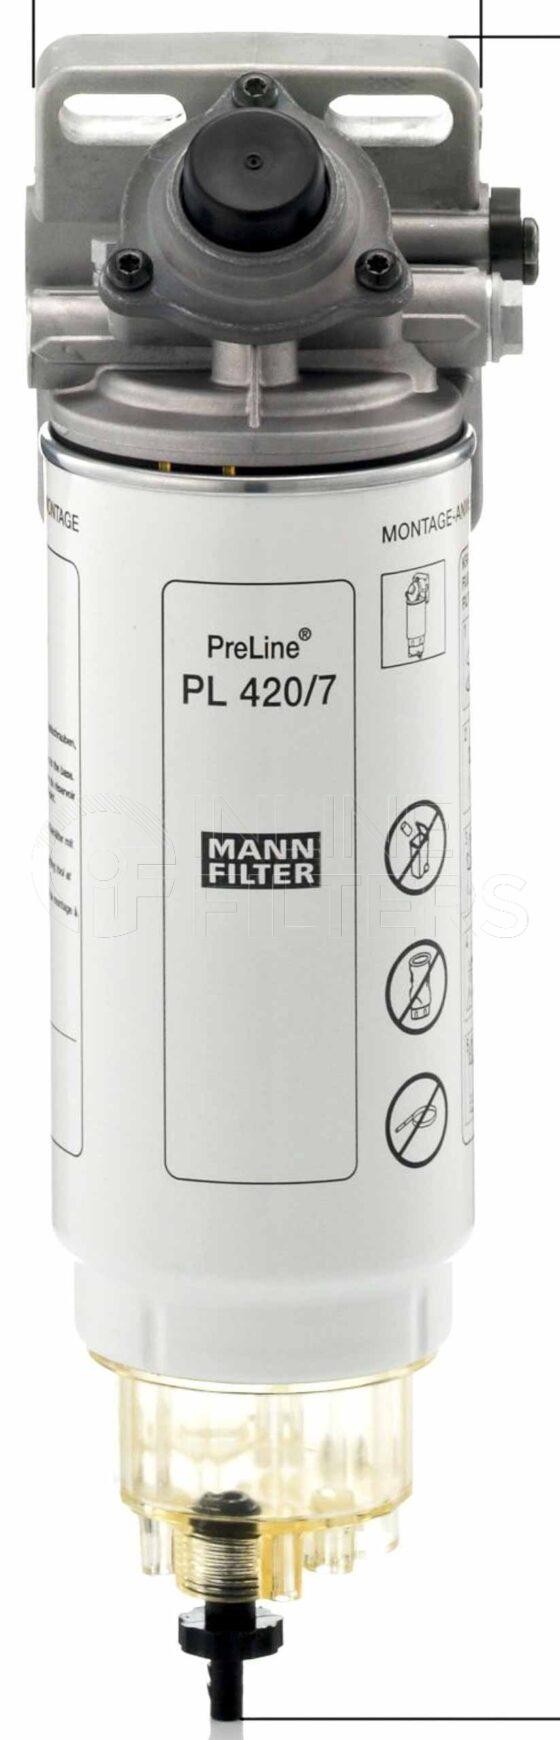 Mann 6660662253. FILTER-Fuel(Brand Specific) Product – Brand Specific Mann – Pre Line Product Service part for PreLine Series PreLine 420